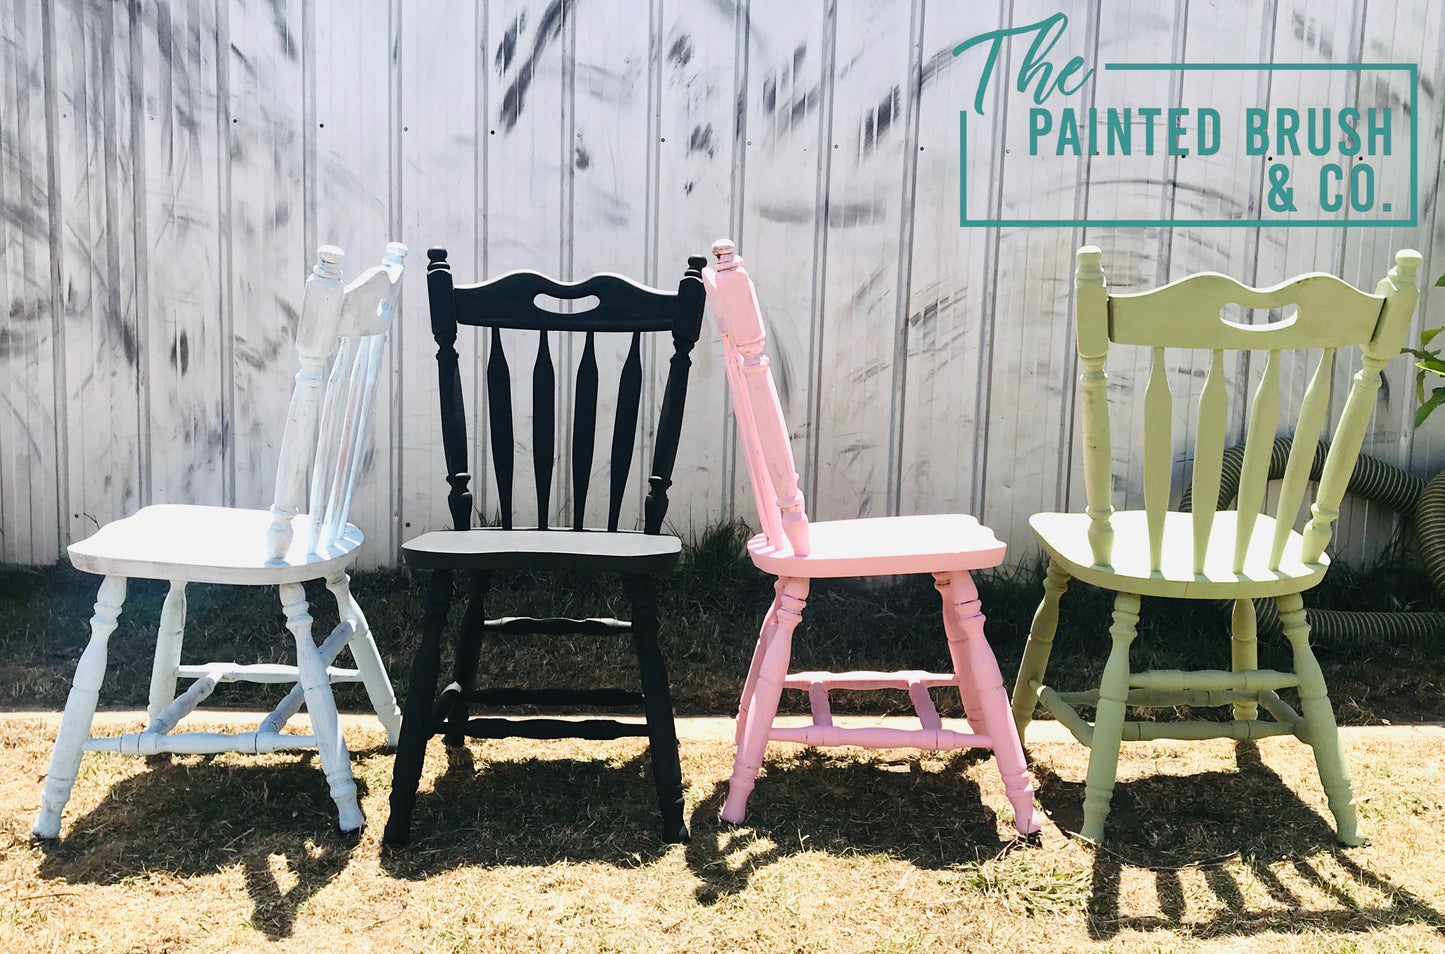 BYOF Introduction to Furniture Painting Workshop | APRIL 27th 10am-2pm